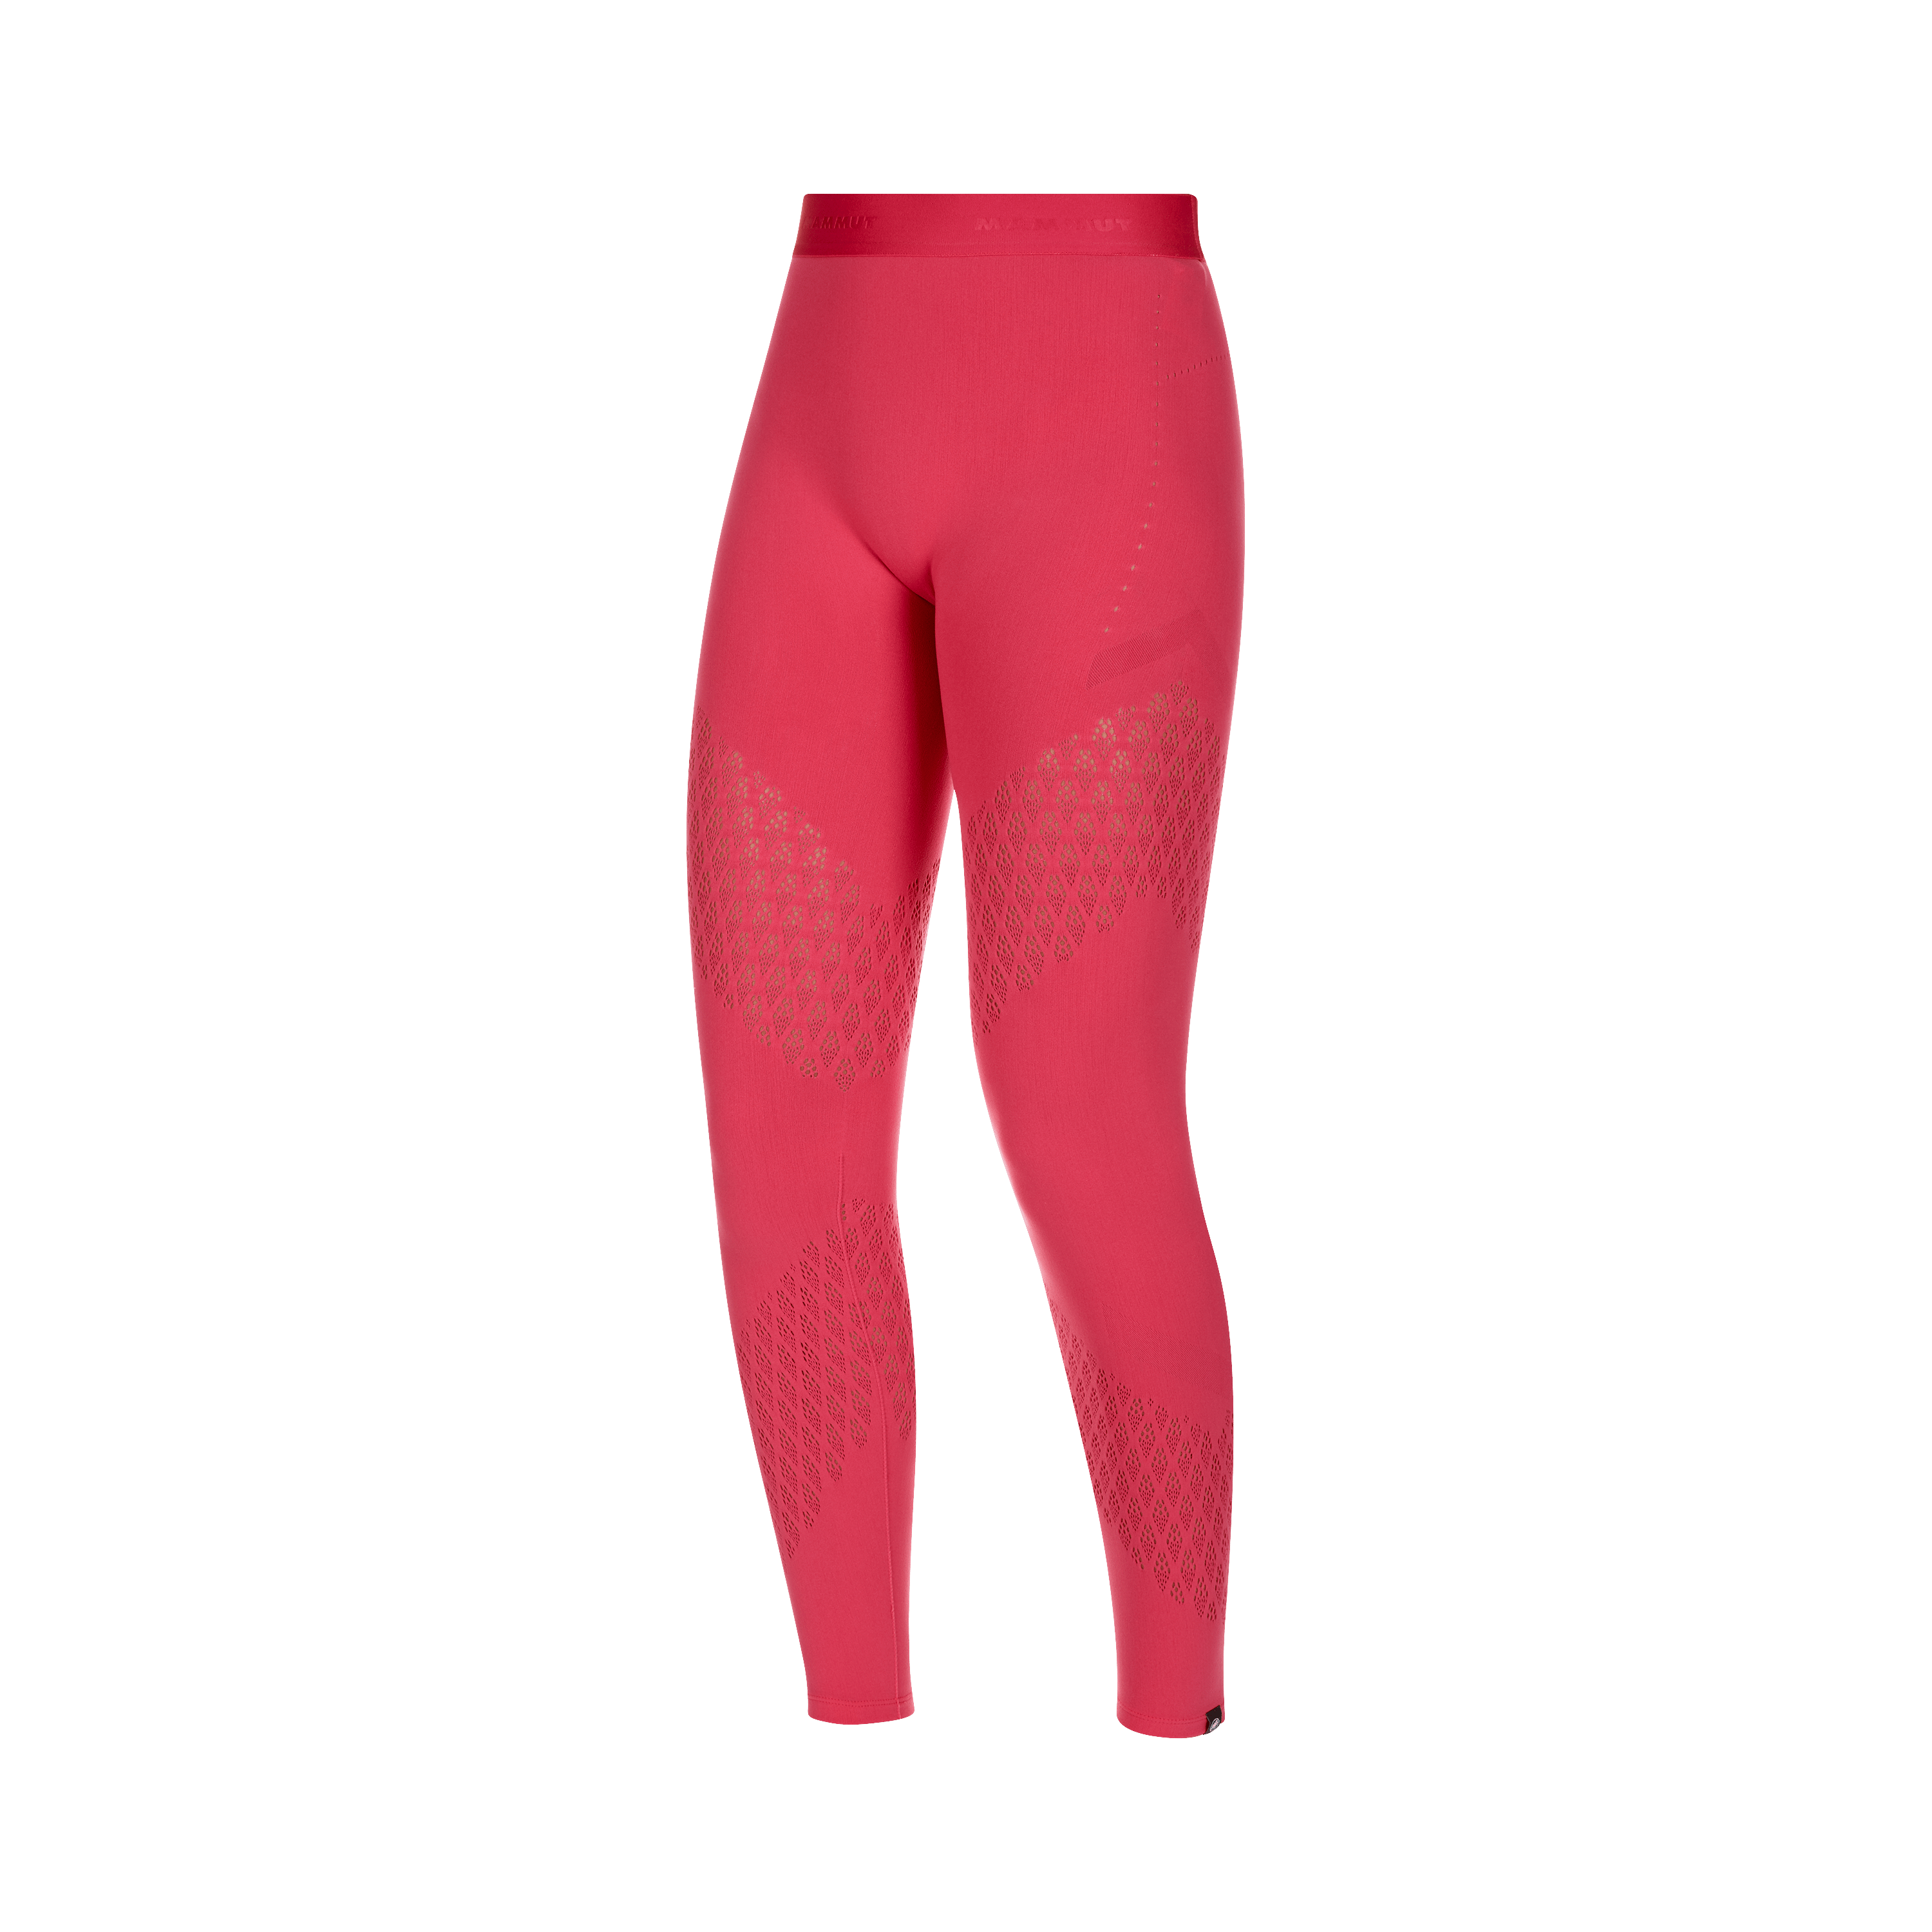 Aelectra Tights Women